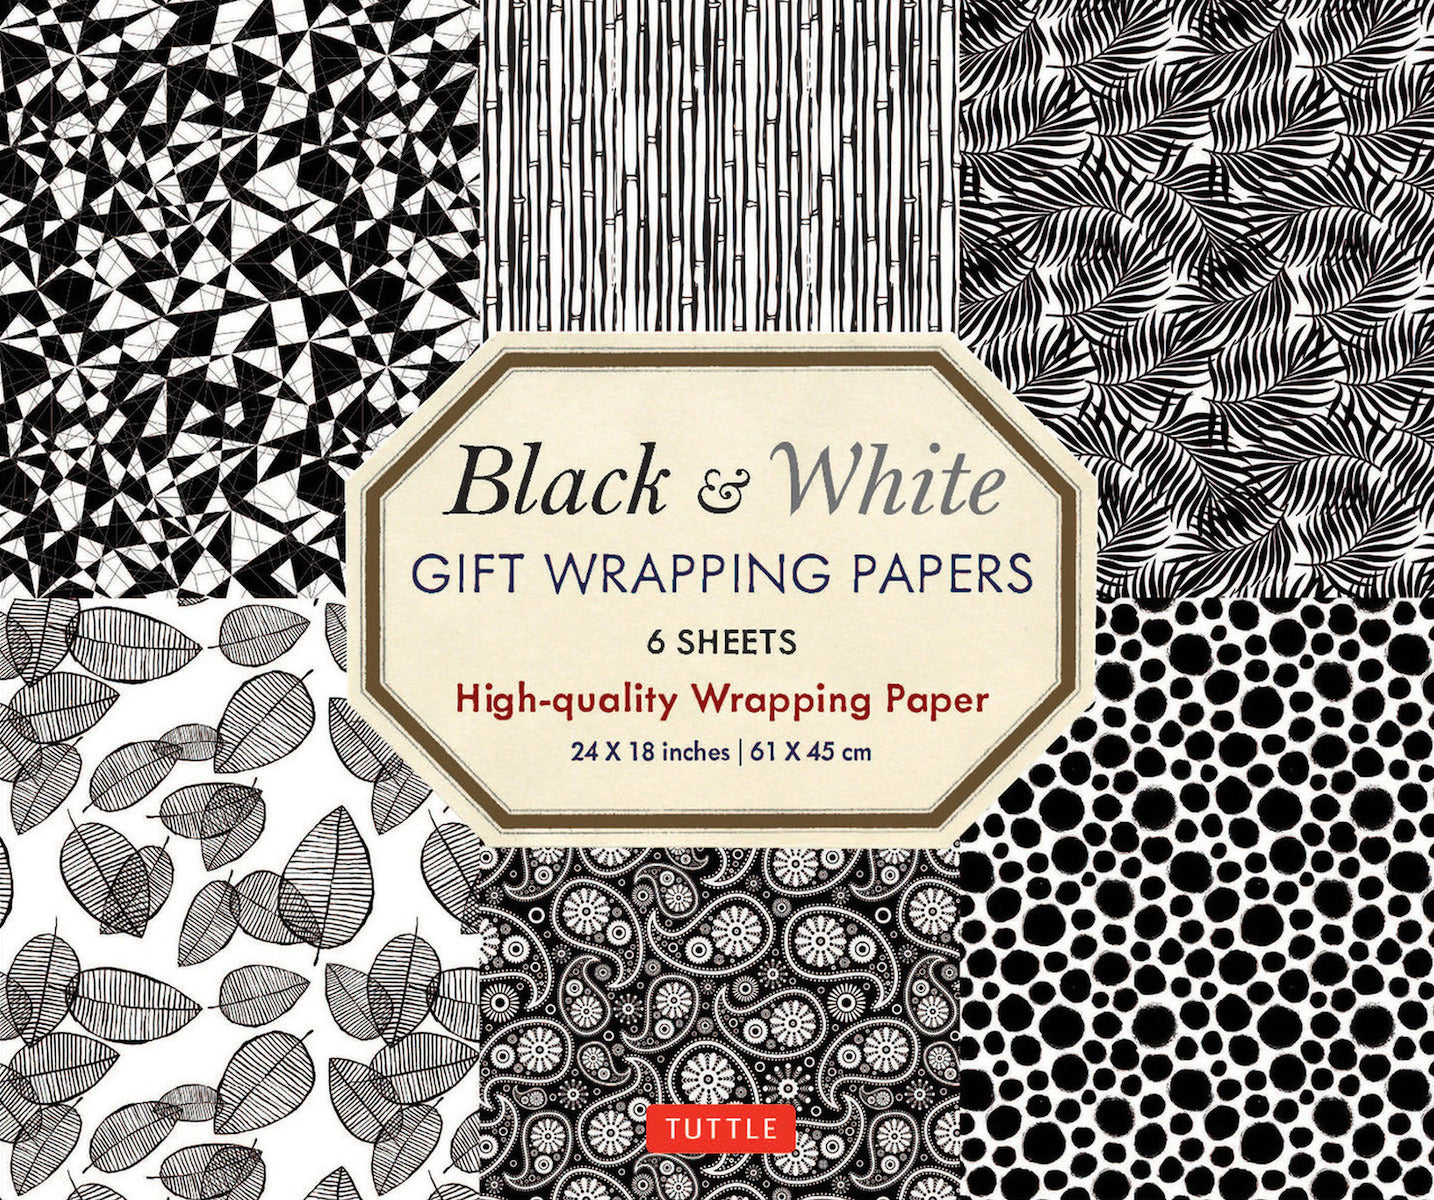 Black & White Gift Wrapping Paper